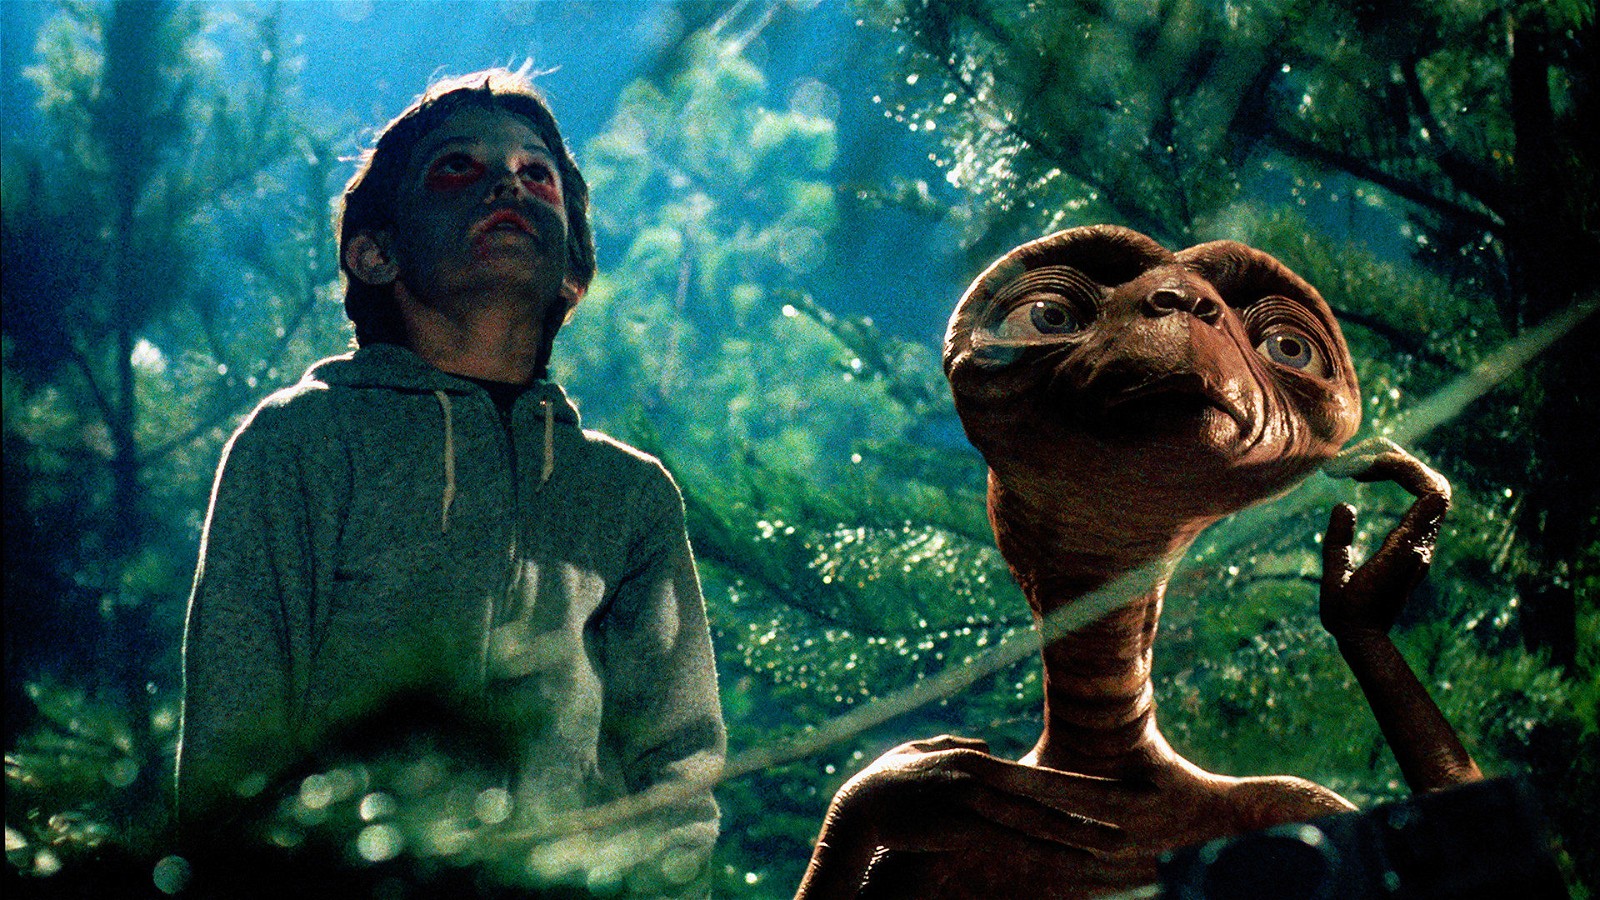 Steven Spielberg's E.T. The Extra-Terrestrial remains one of his most beloved films | Universal Pictures